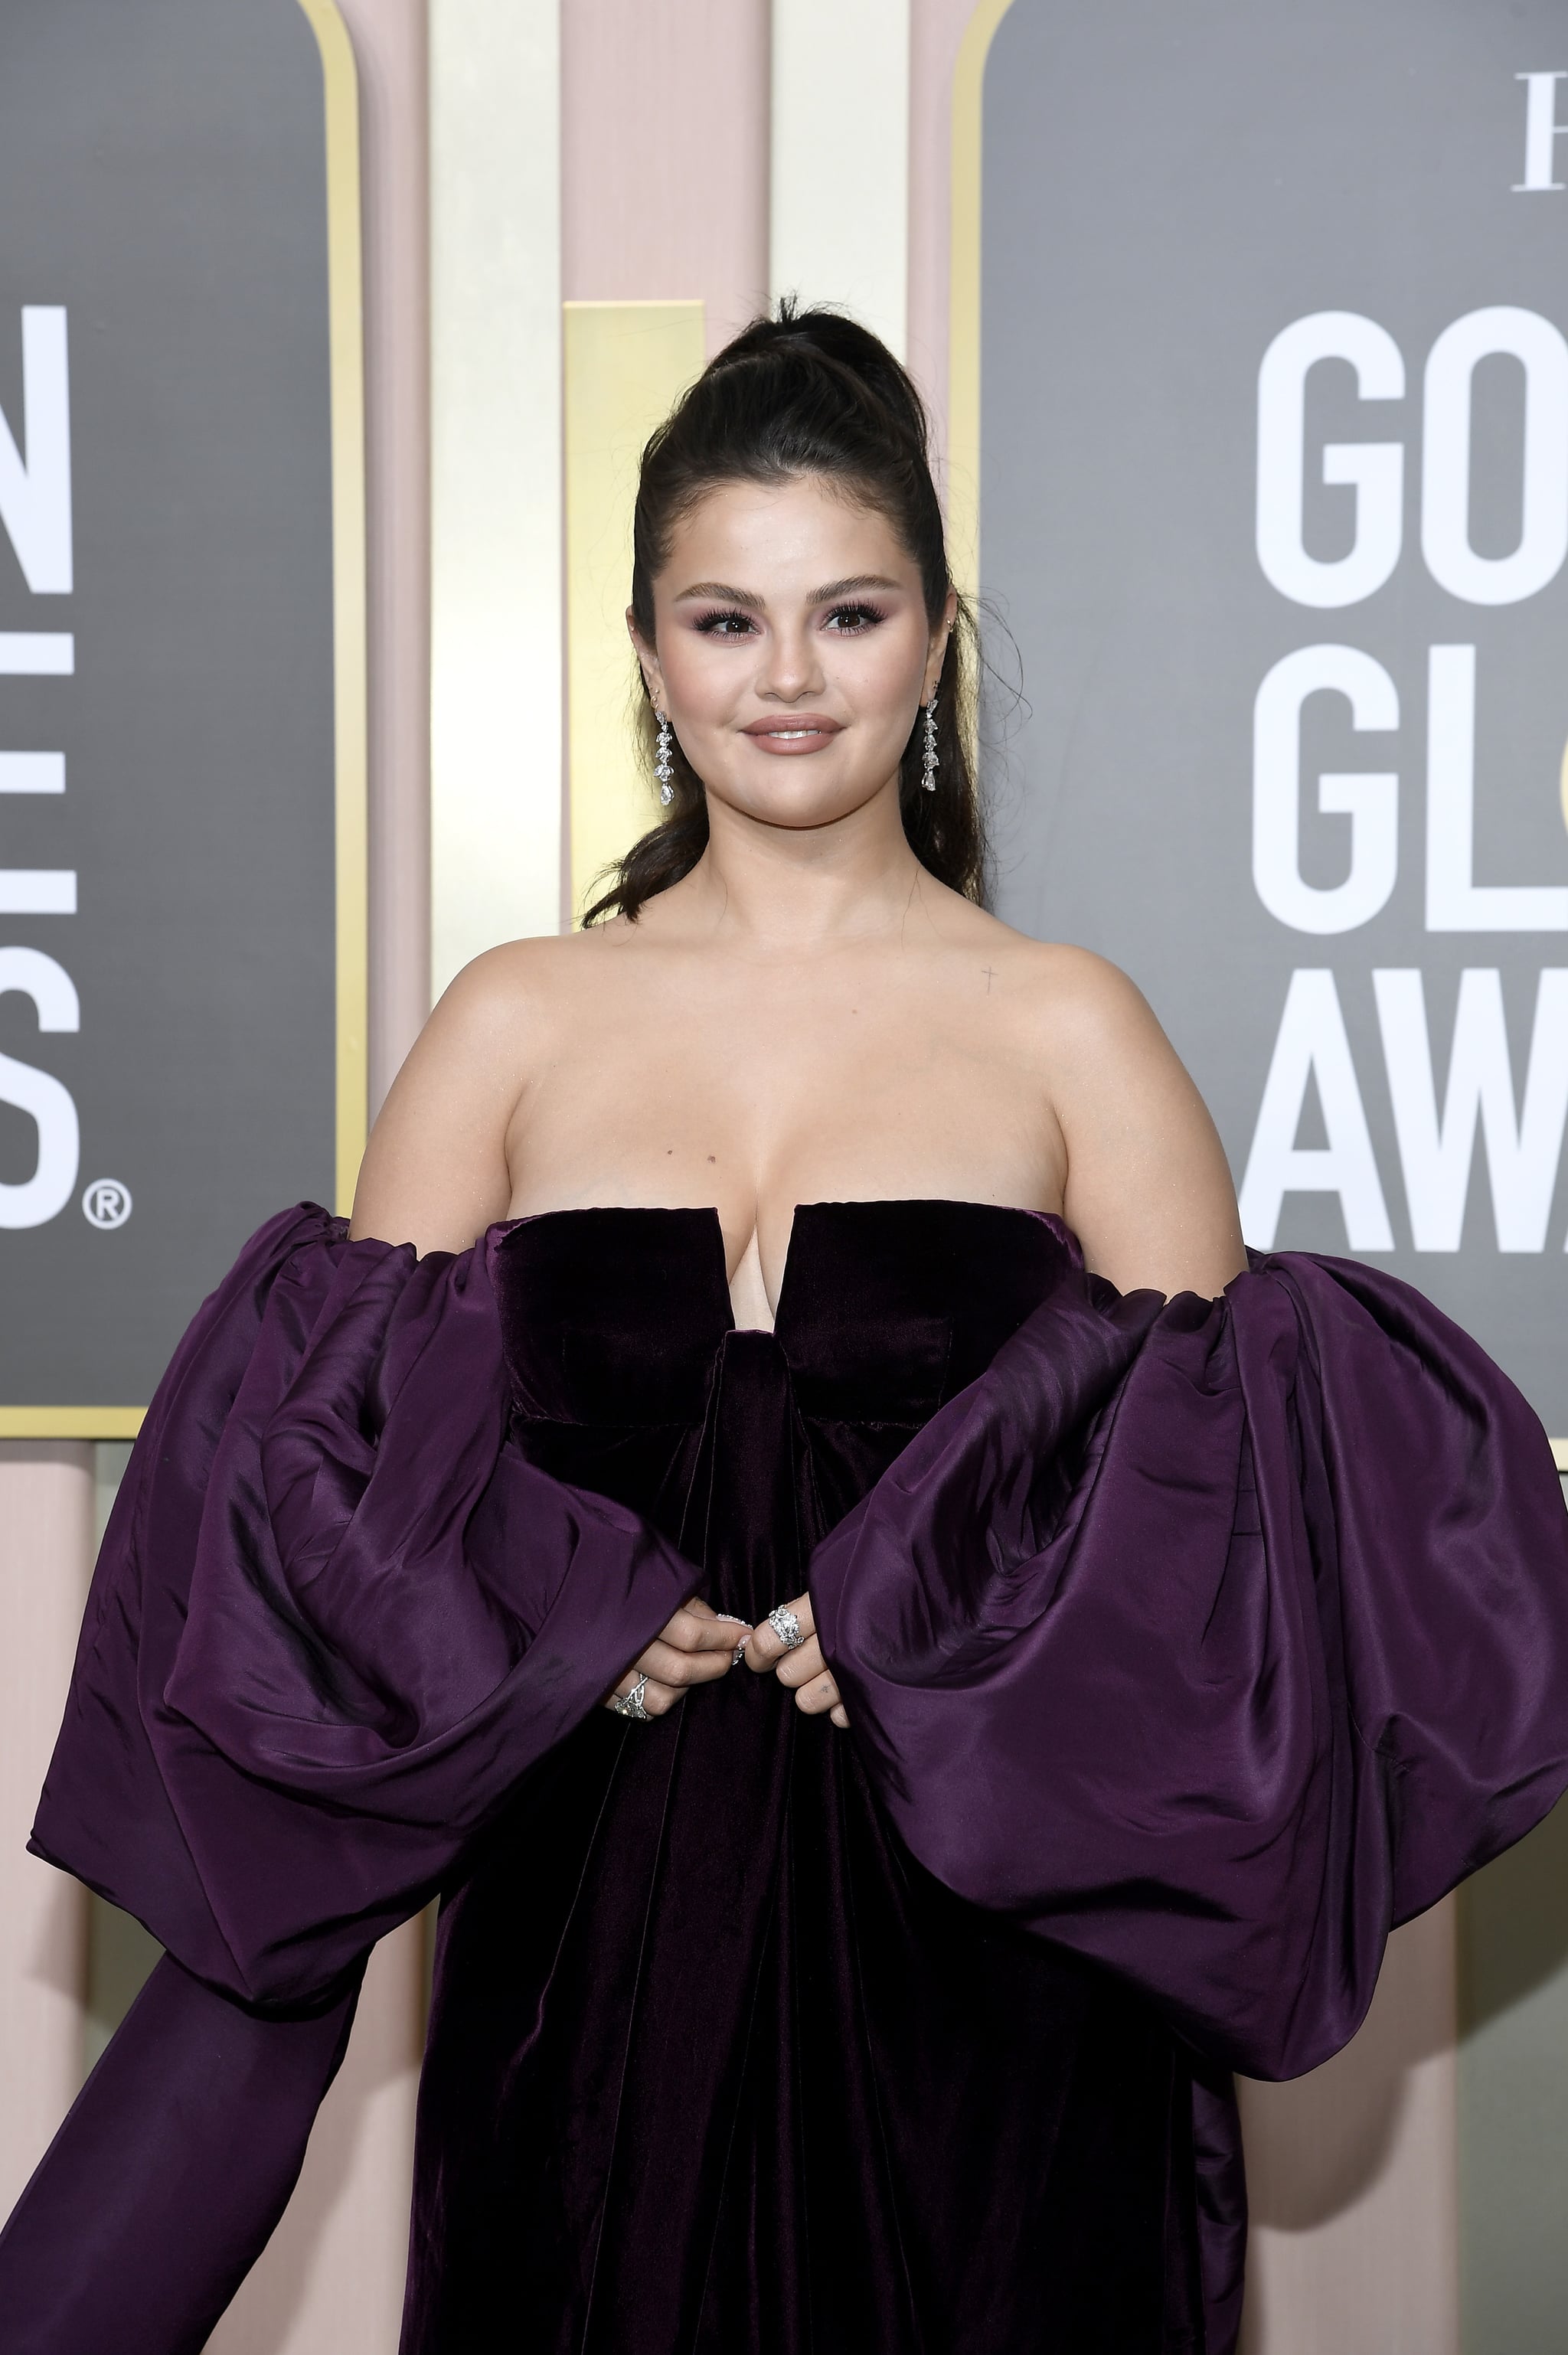 BEVERLY HILLS, CALIFORNIA - JANUARY 10: 80th Annual GOLDEN GLOBE AWARDS -- Pictured: Selena Gomez arrives at the 80th Annual Golden Globe Awards held at the Beverly Hilton Hotel on January 10, 2023 in Beverly Hills, California.  -- (Photo by Kevork Djansezian/NBC via Getty Images)